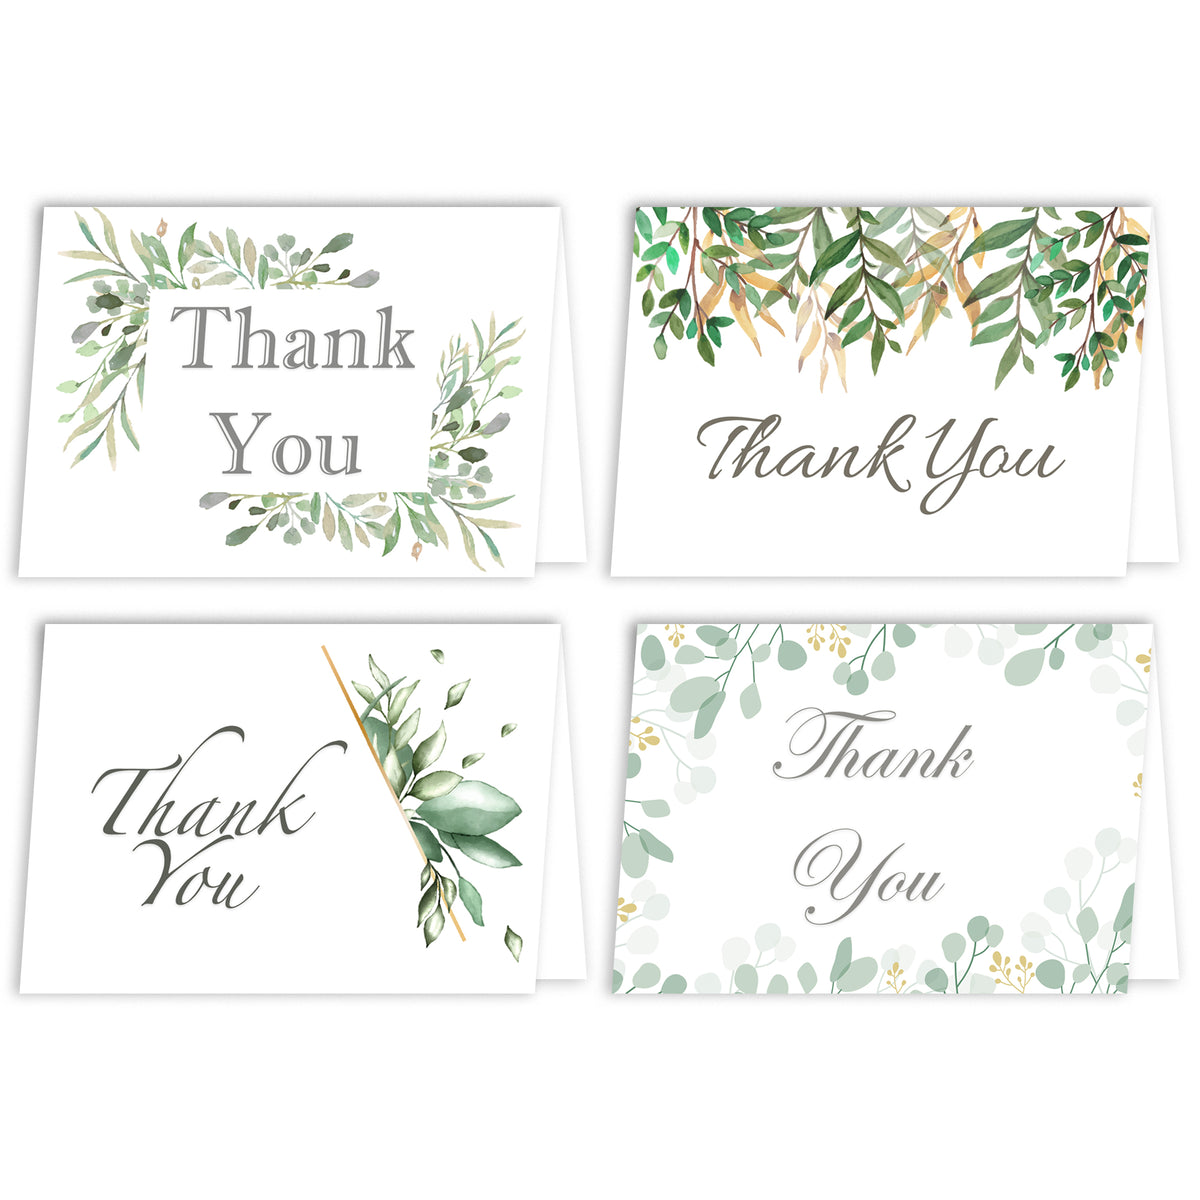 Pre-Printed Folded A1 Thank you Cards and Envelopes - 25 pack